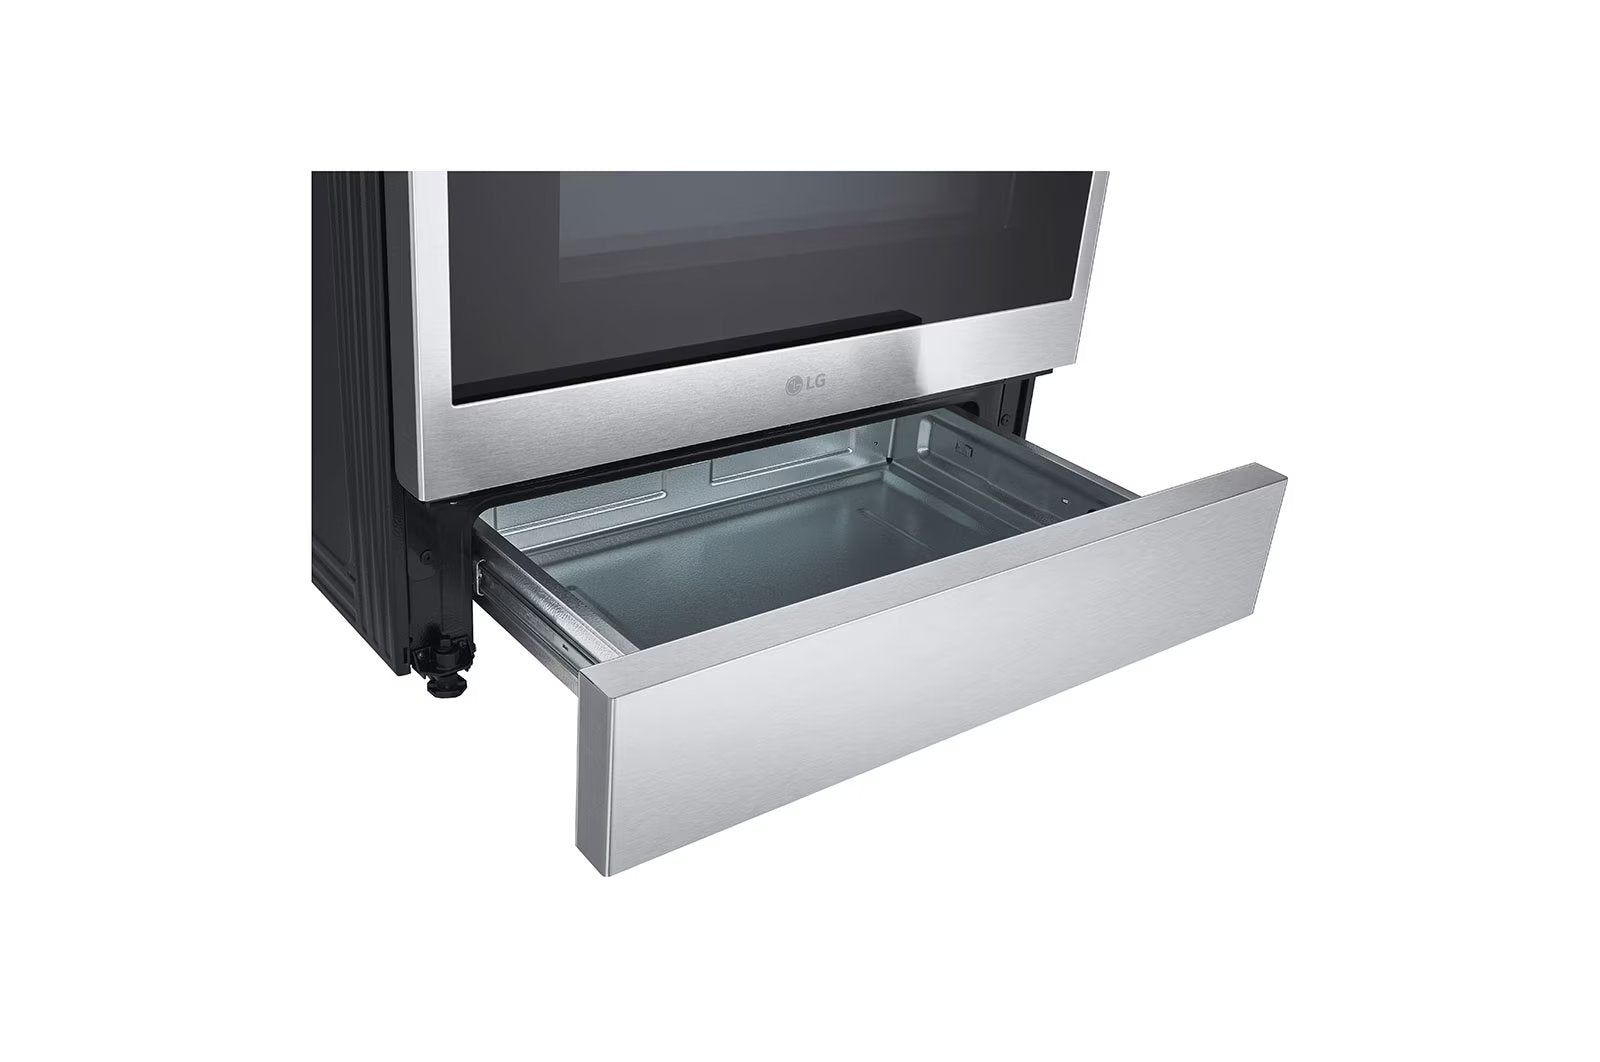 LG - 6.3 cu. ft  Induction Range in Stainless - LSIL6336F